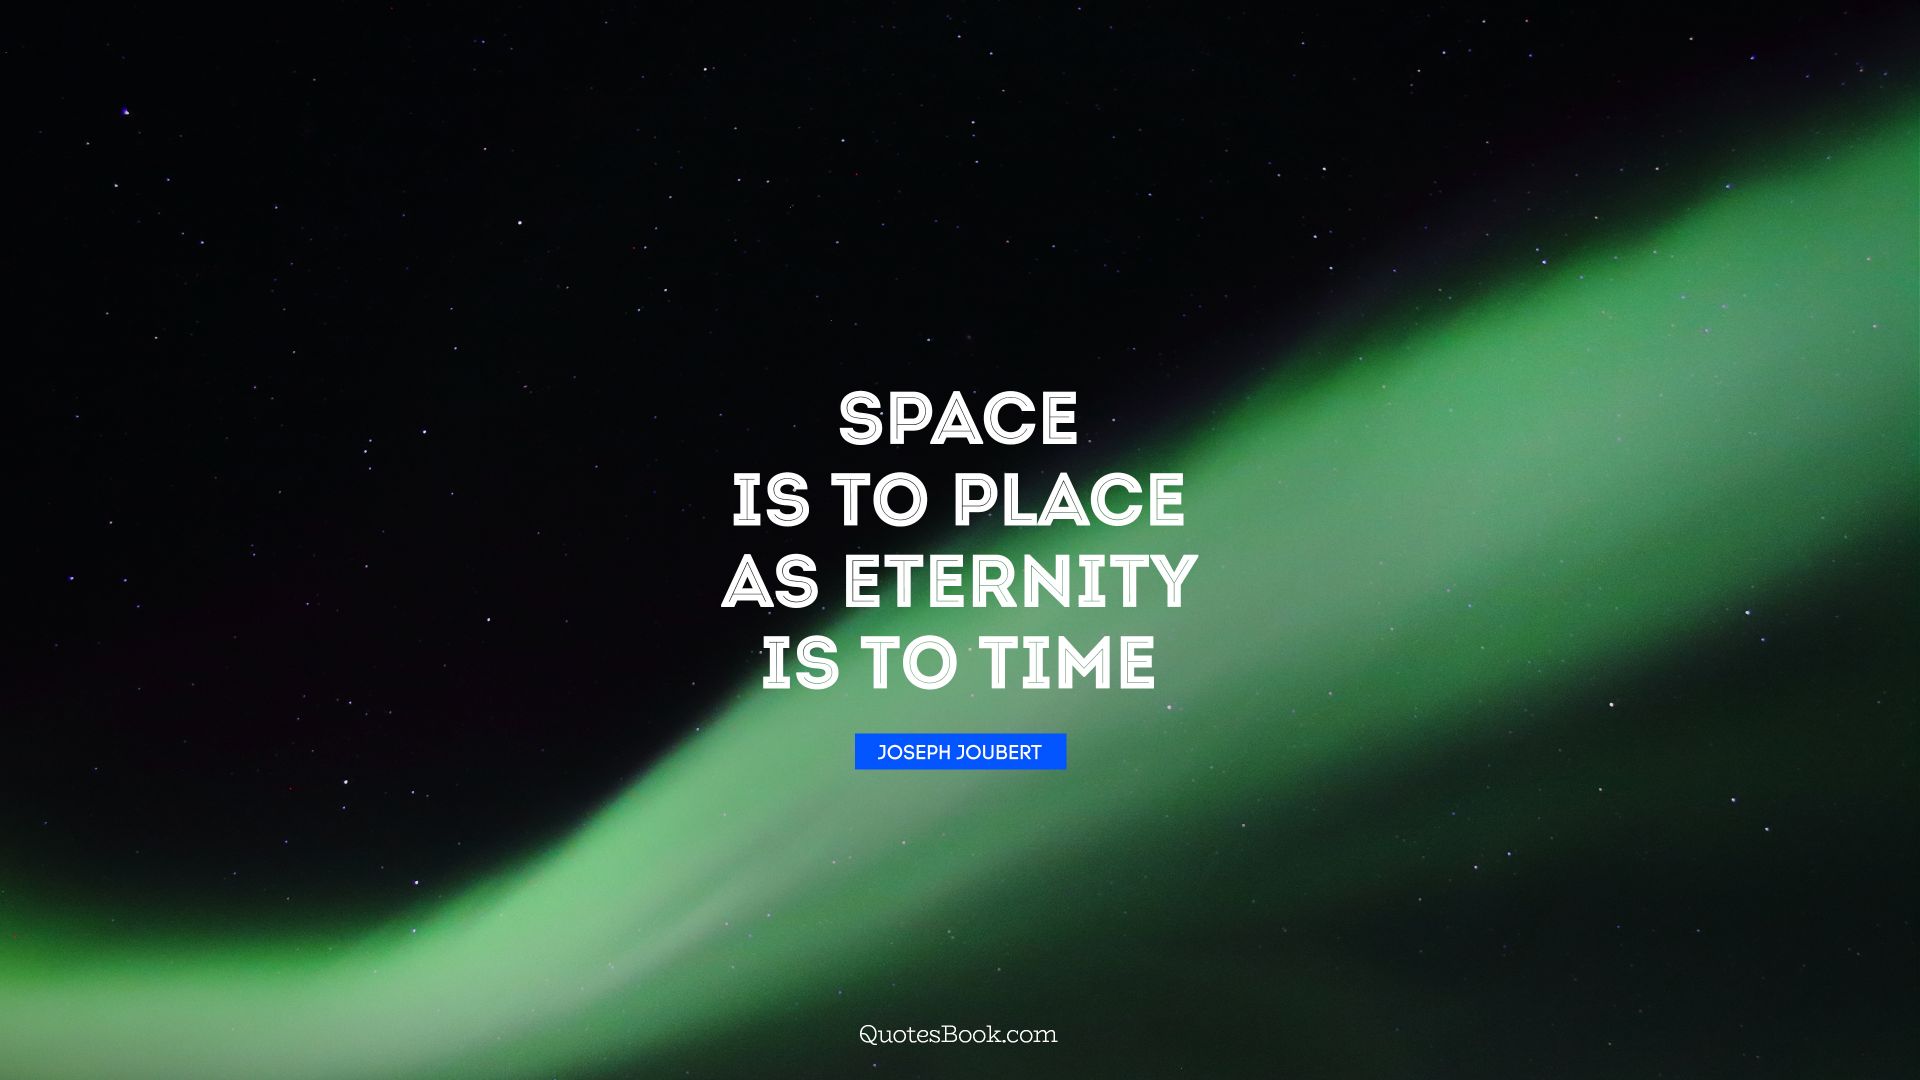 Space is to place as eternity is to time. - Quote by Joseph Joubert